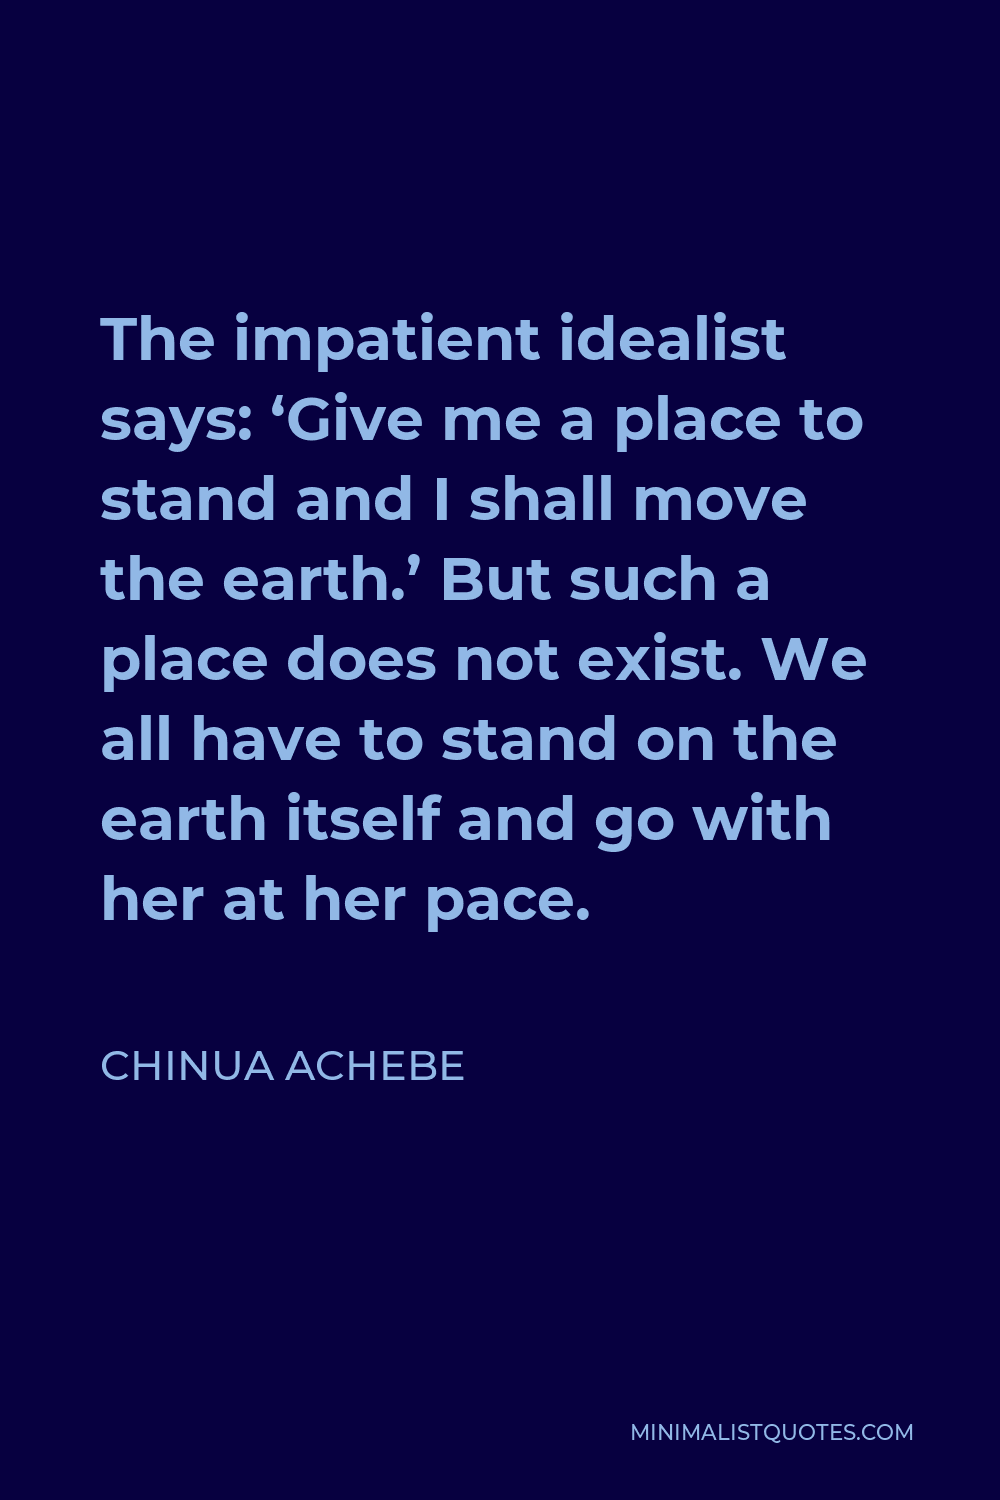 Chinua Achebe Quote - The impatient idealist says: ‘Give me a place to stand and I shall move the earth.’ But such a place does not exist. We all have to stand on the earth itself and go with her at her pace.